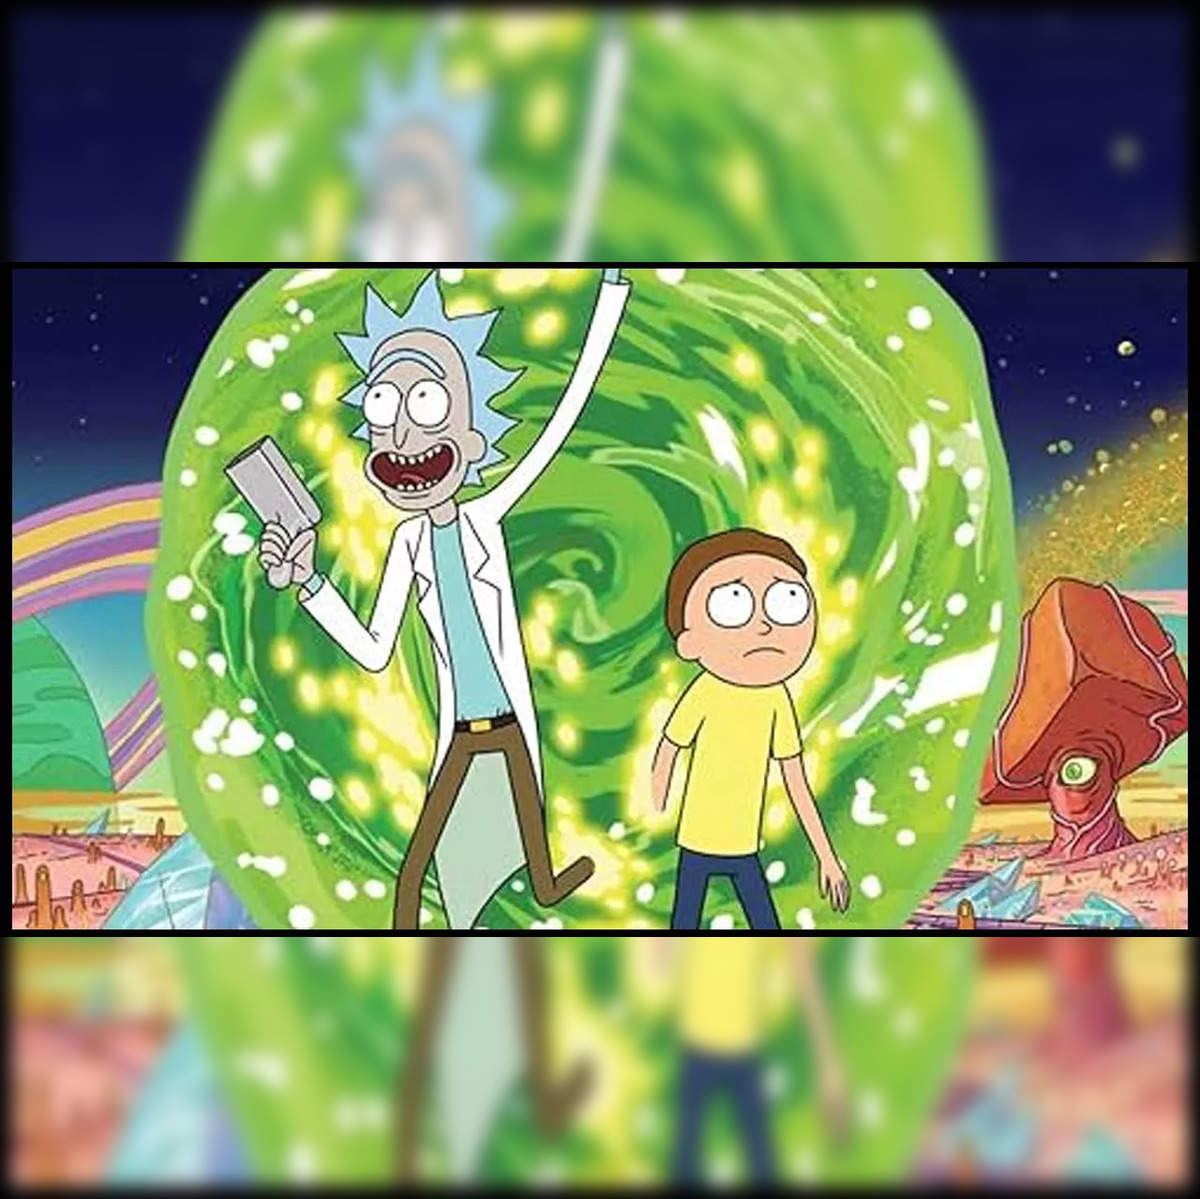 Rick and Morty Season 7 Episode 7 Streaming: How to Watch & Stream